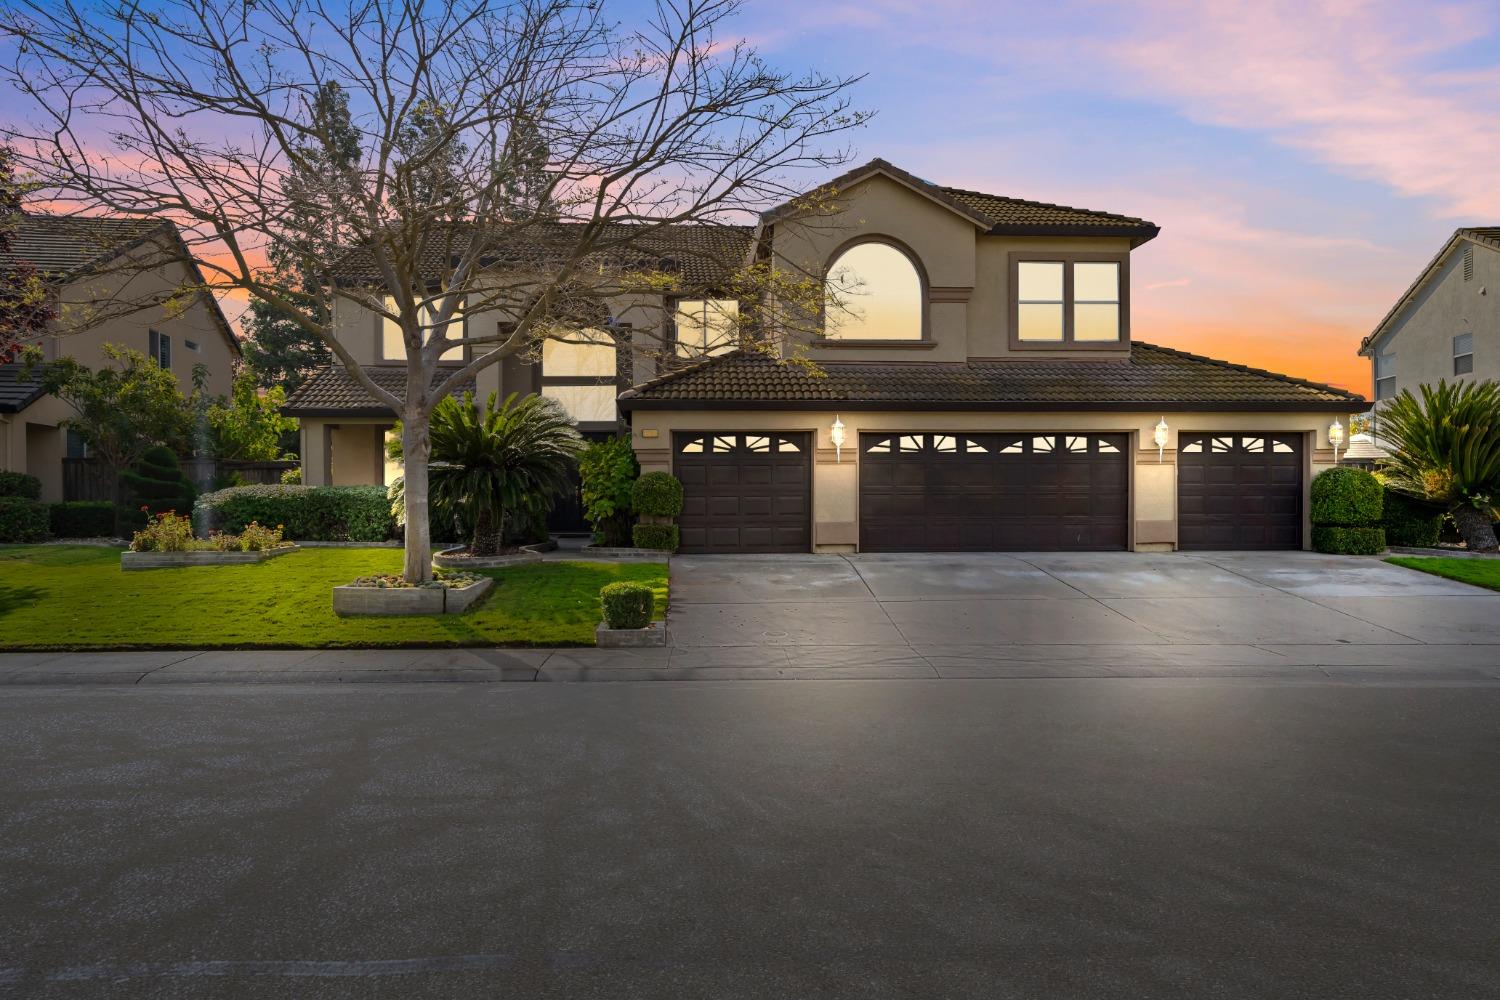 Photo of 9580 Lakepoint Dr in Elk Grove, CA